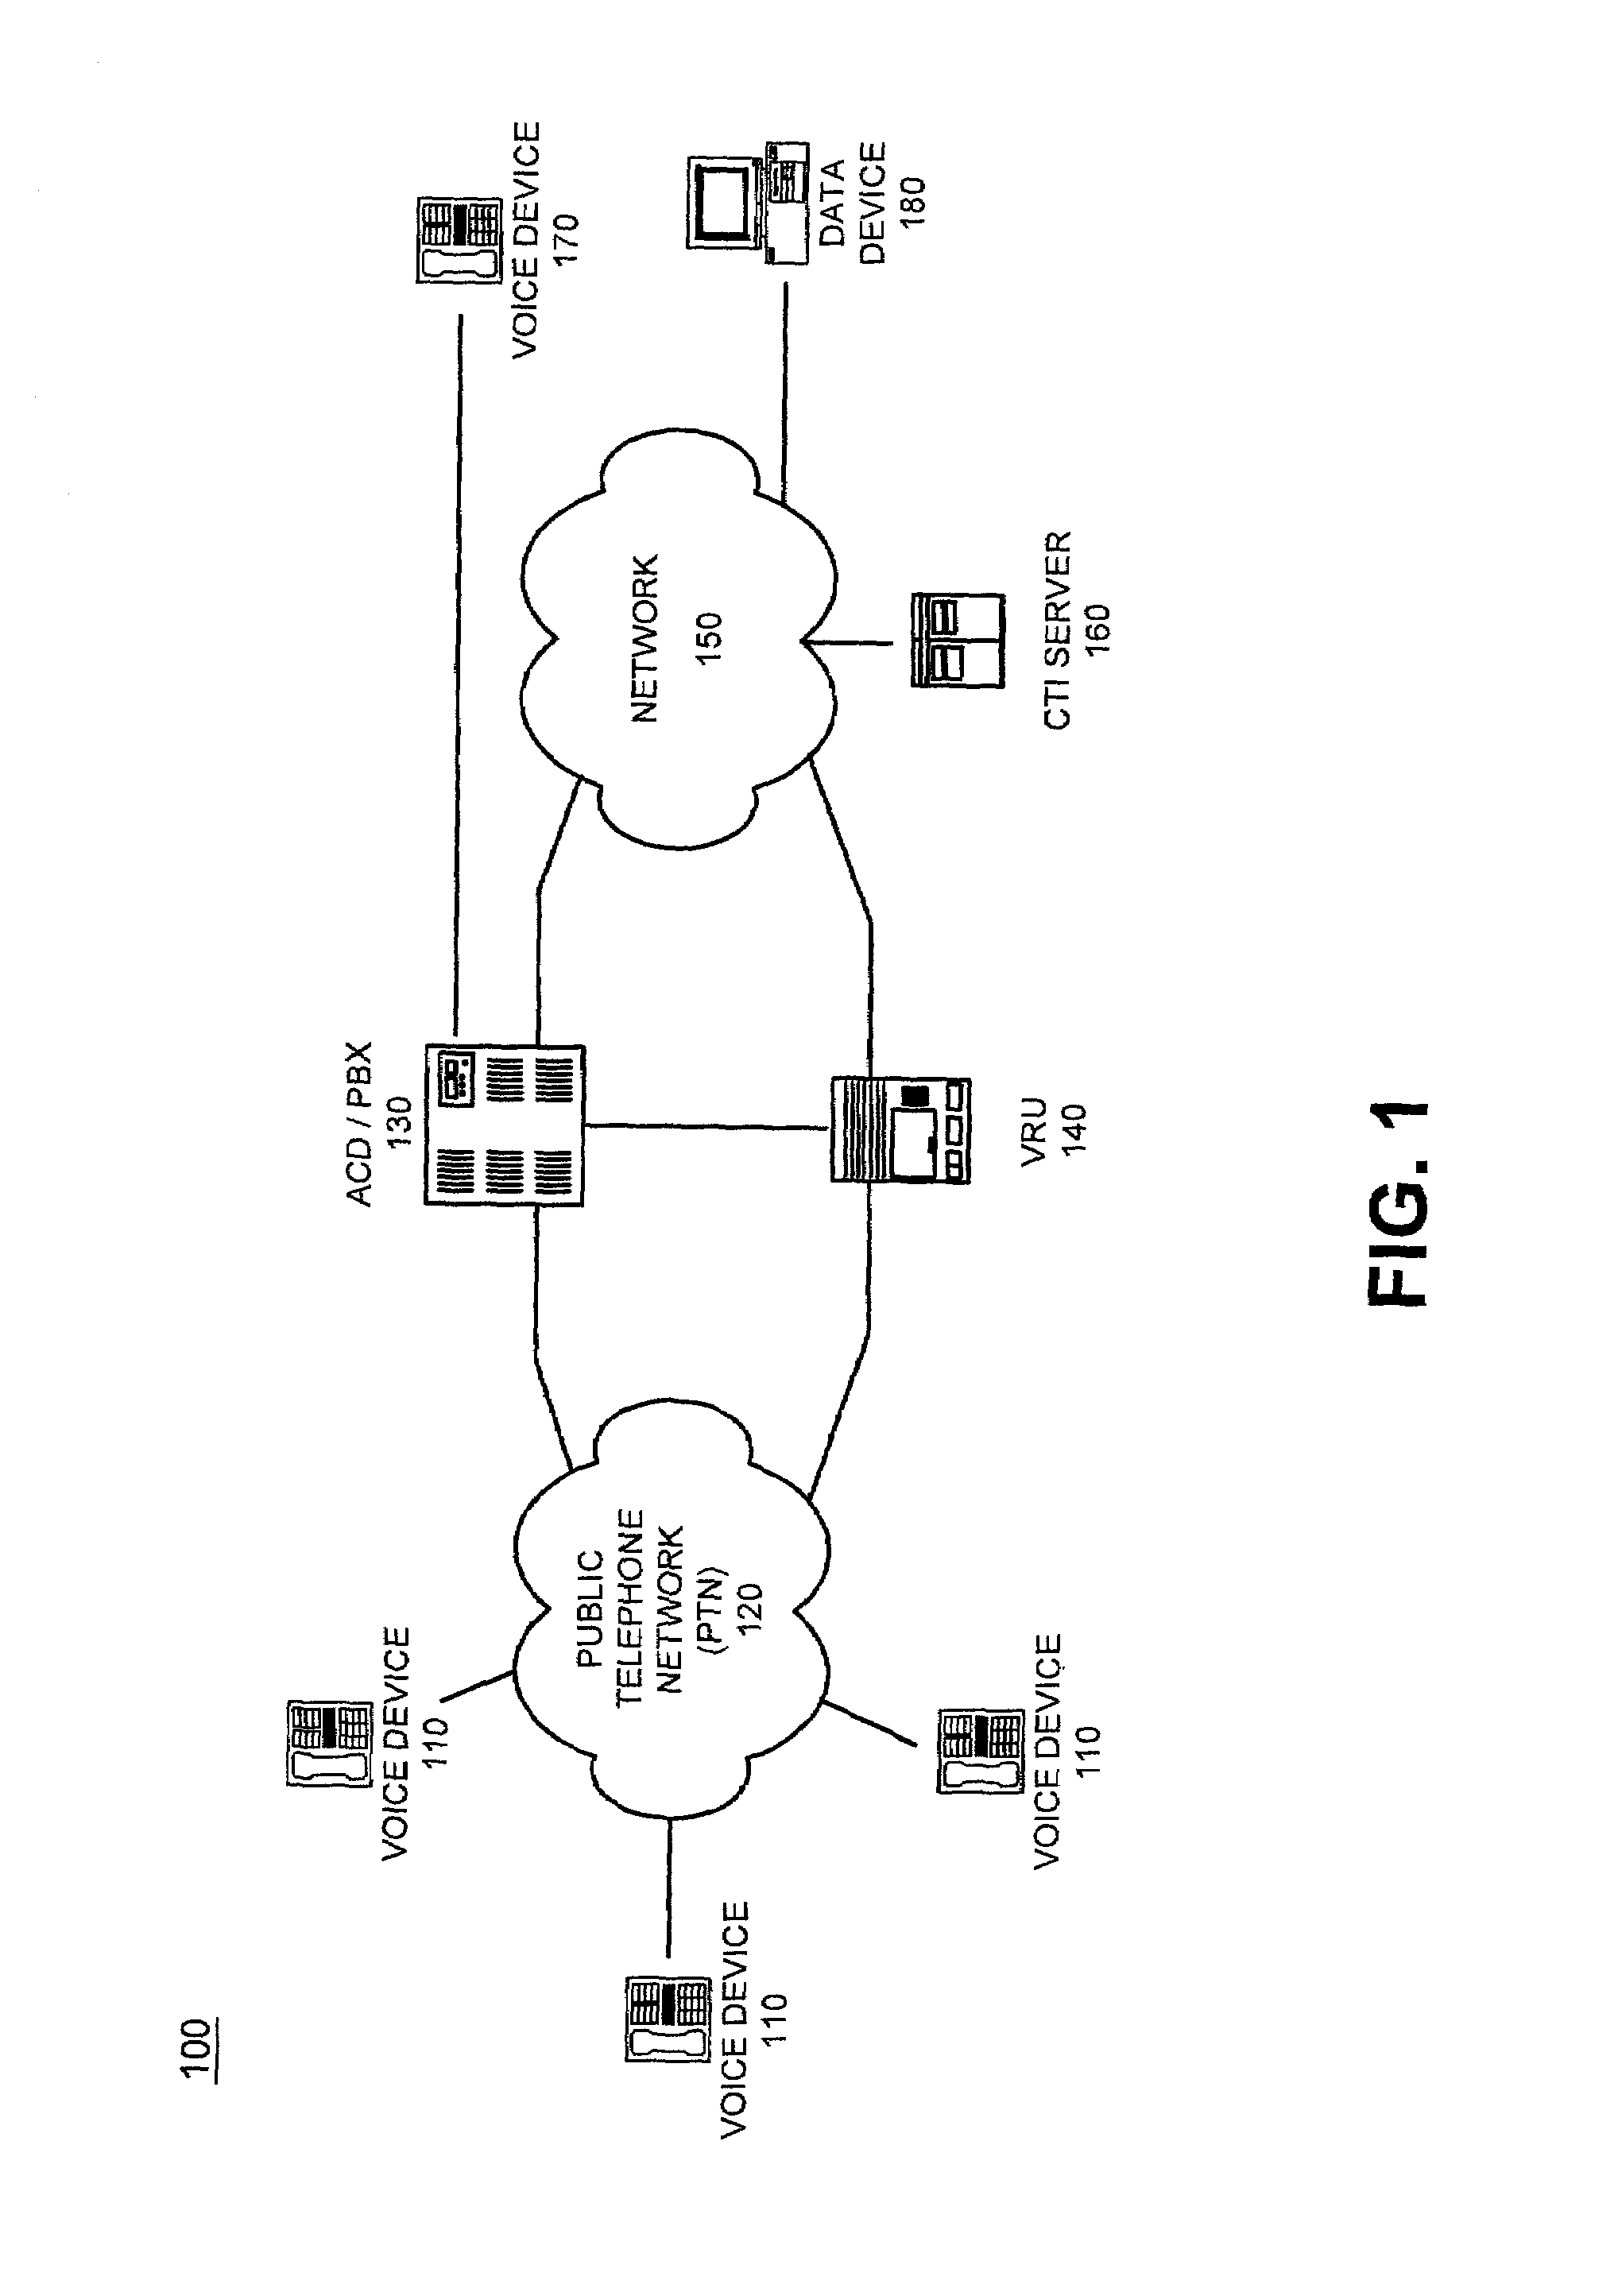 Systems and methods for providing audio information to service agents